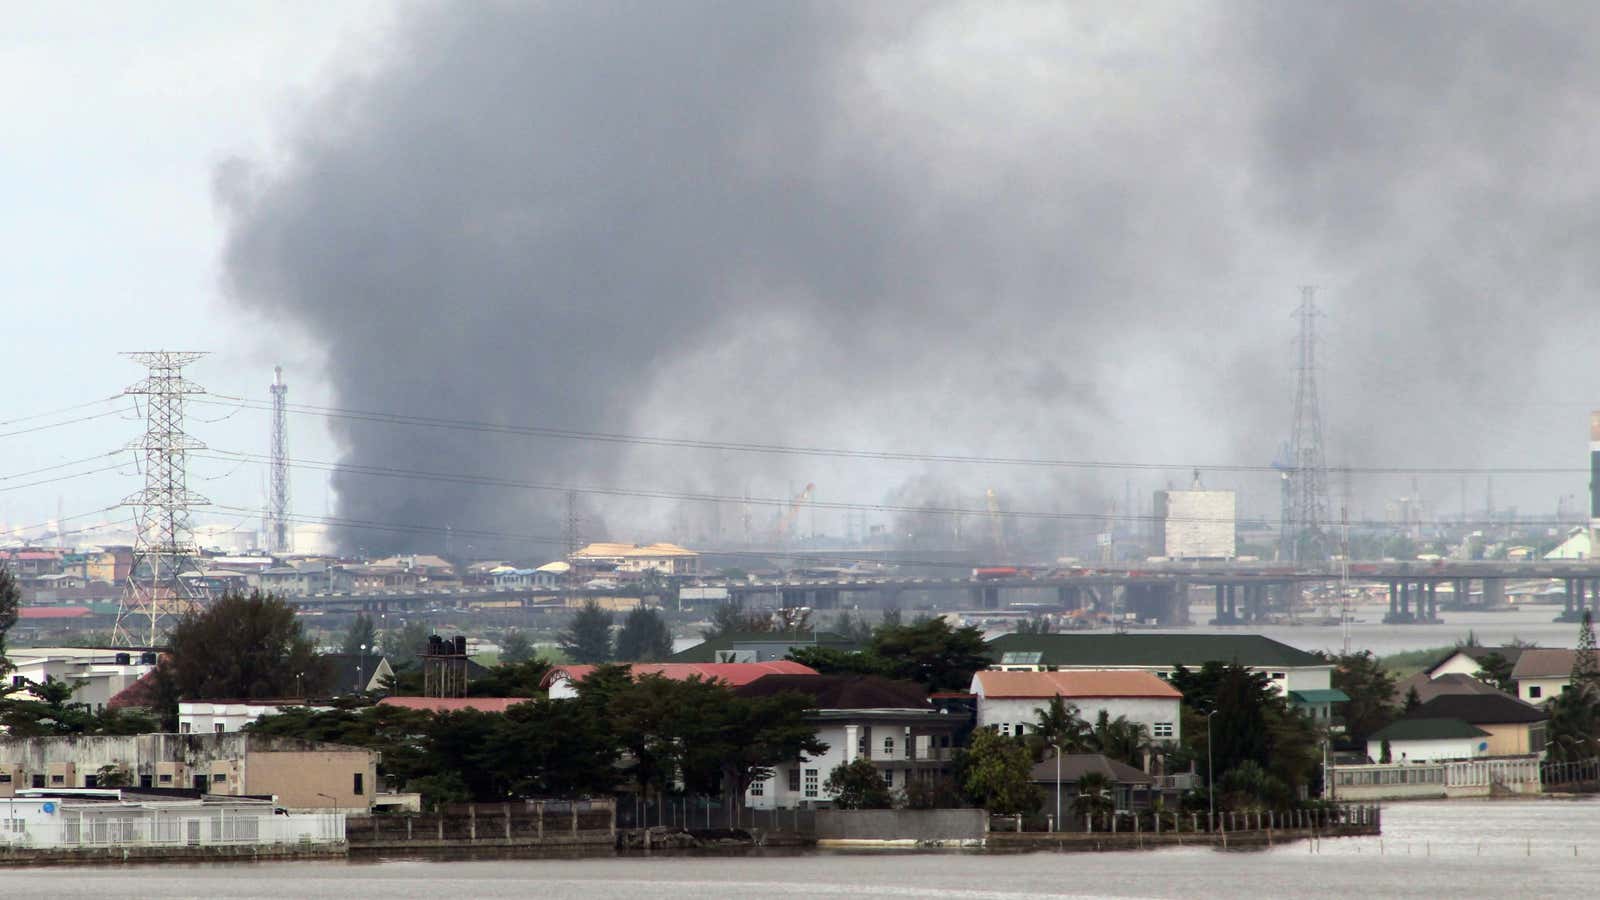 Smoke rises from Lagos mainland, Nigeria, Oct. 21, 2020 after building are set alight in response to security shooting of protesters on Oct. 20.